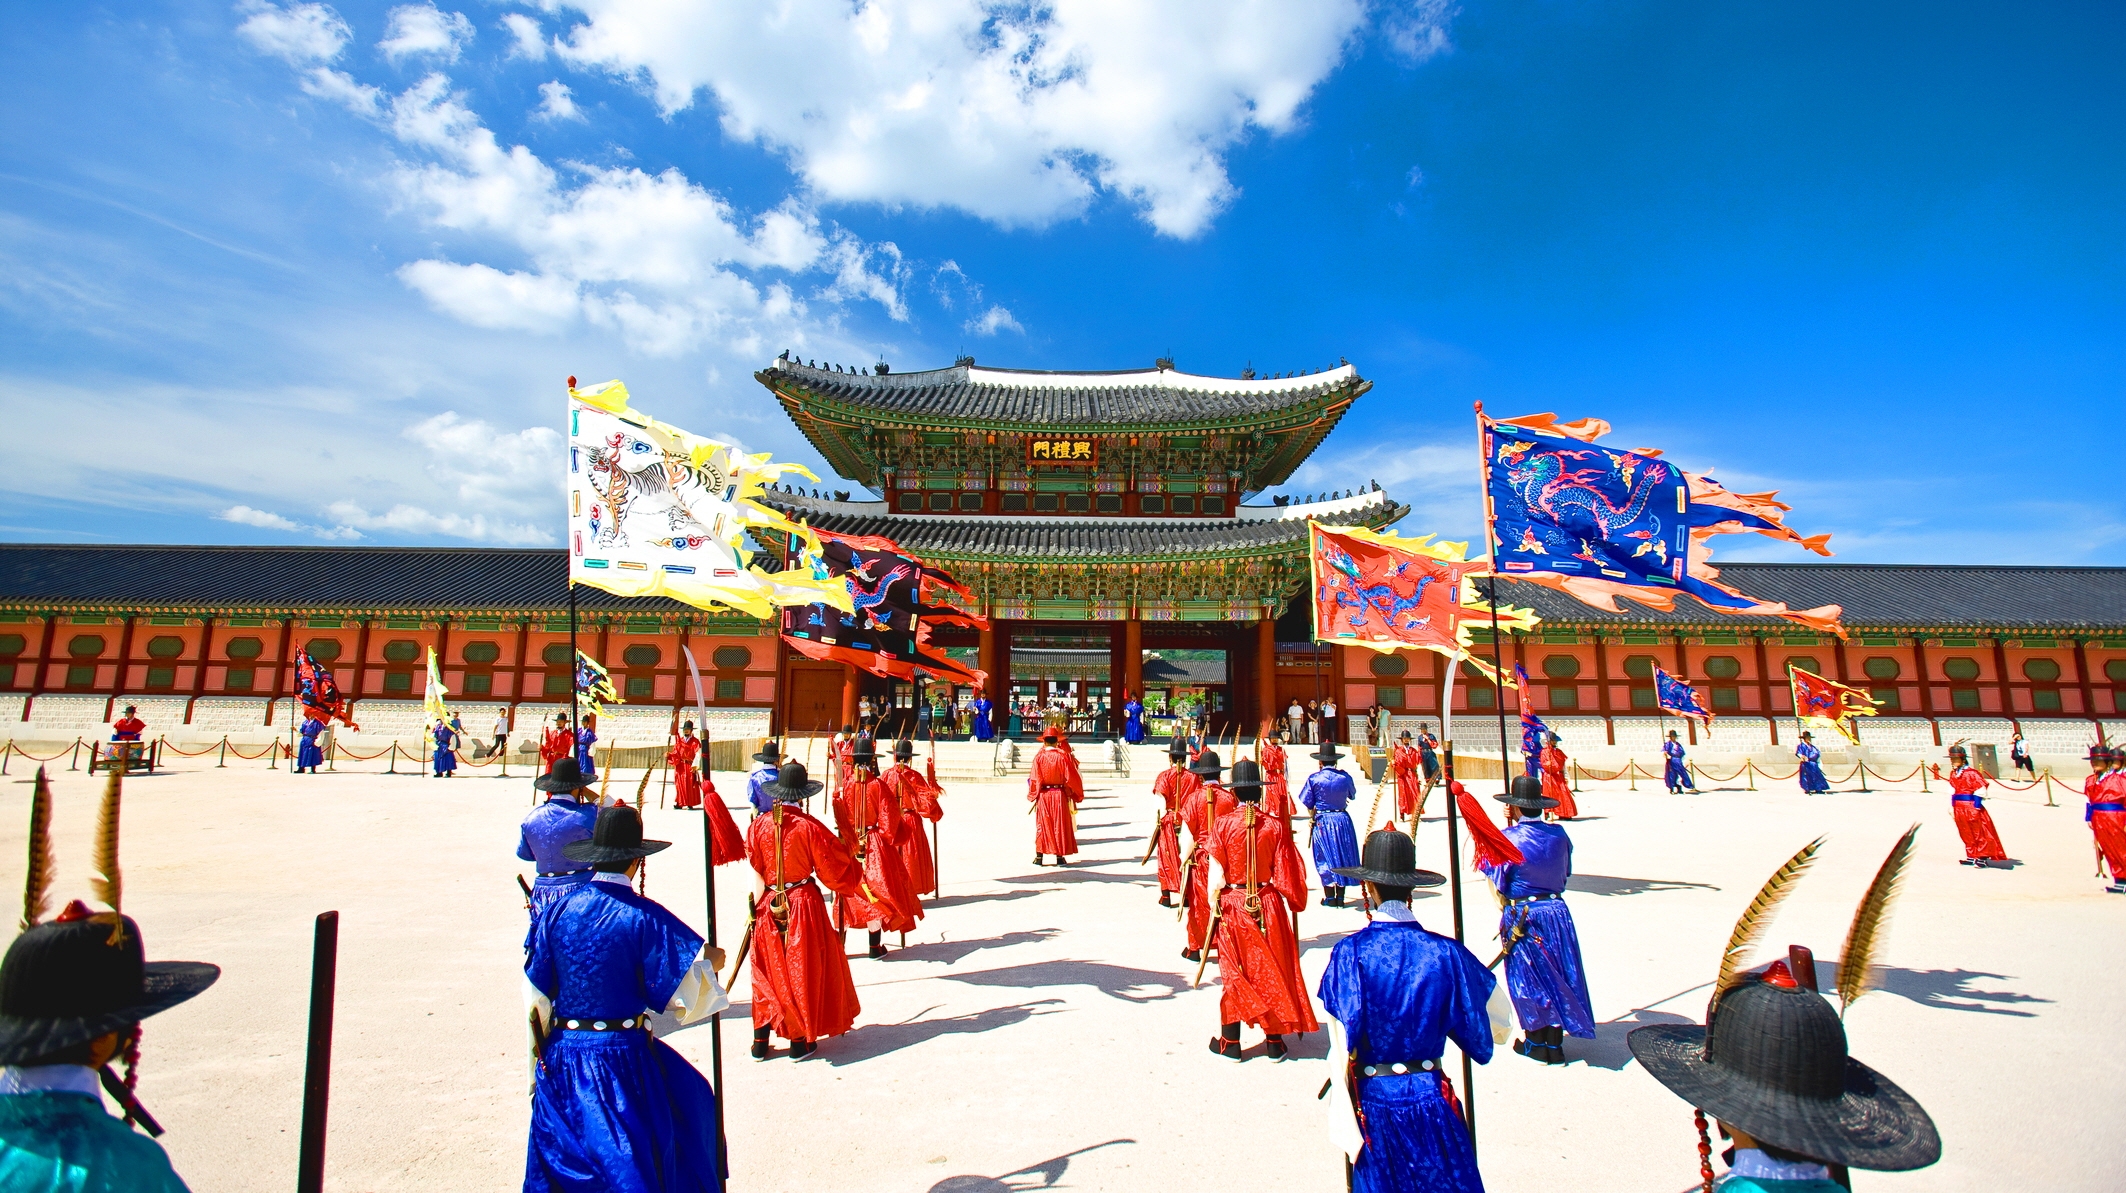 From Iconic Attractions to Trending New Places, Top 9 Attractions in Seoul!